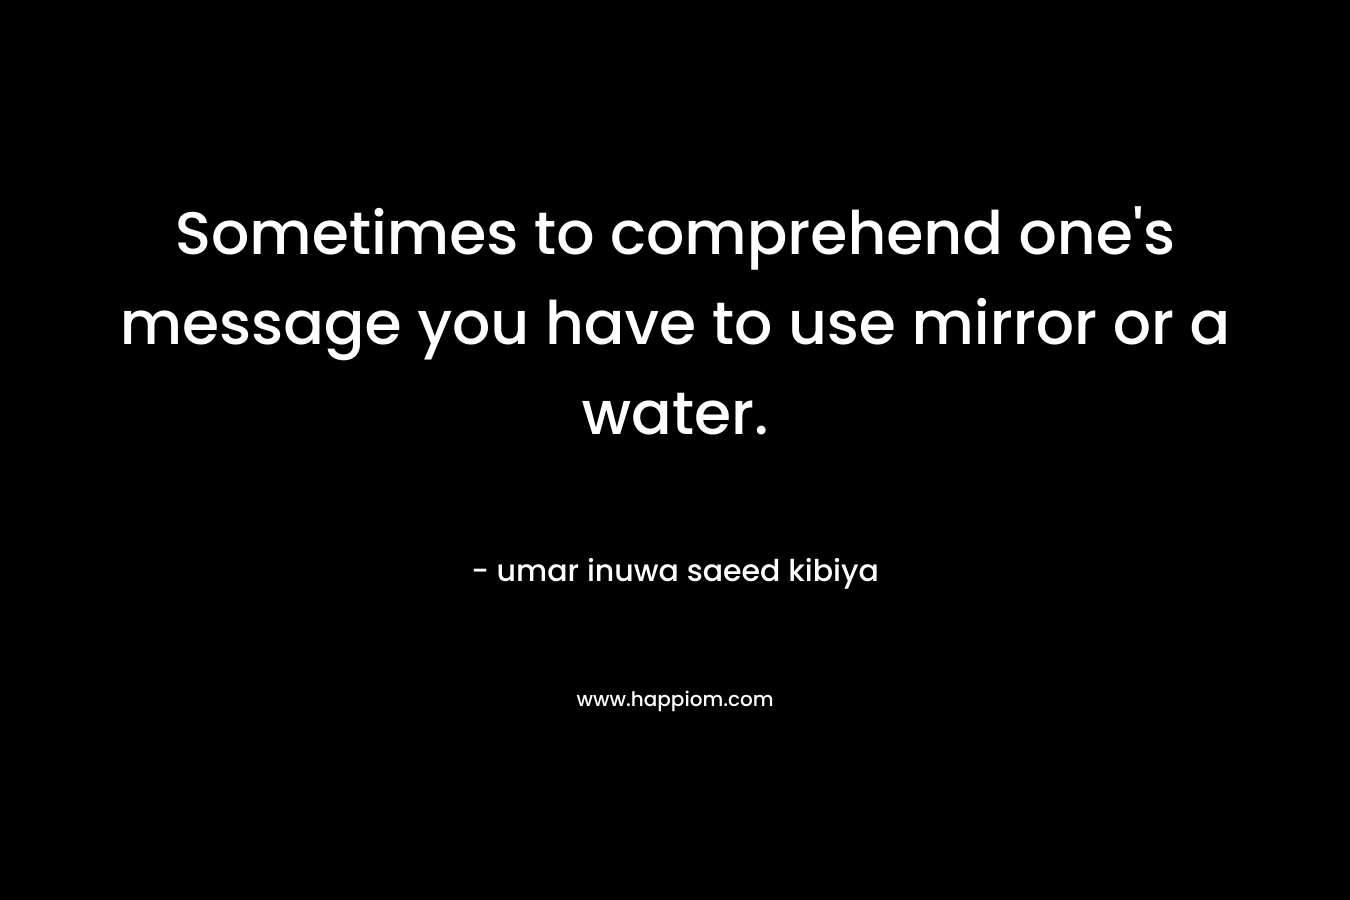 Sometimes to comprehend one’s message you have to use mirror or a water. – umar inuwa saeed kibiya